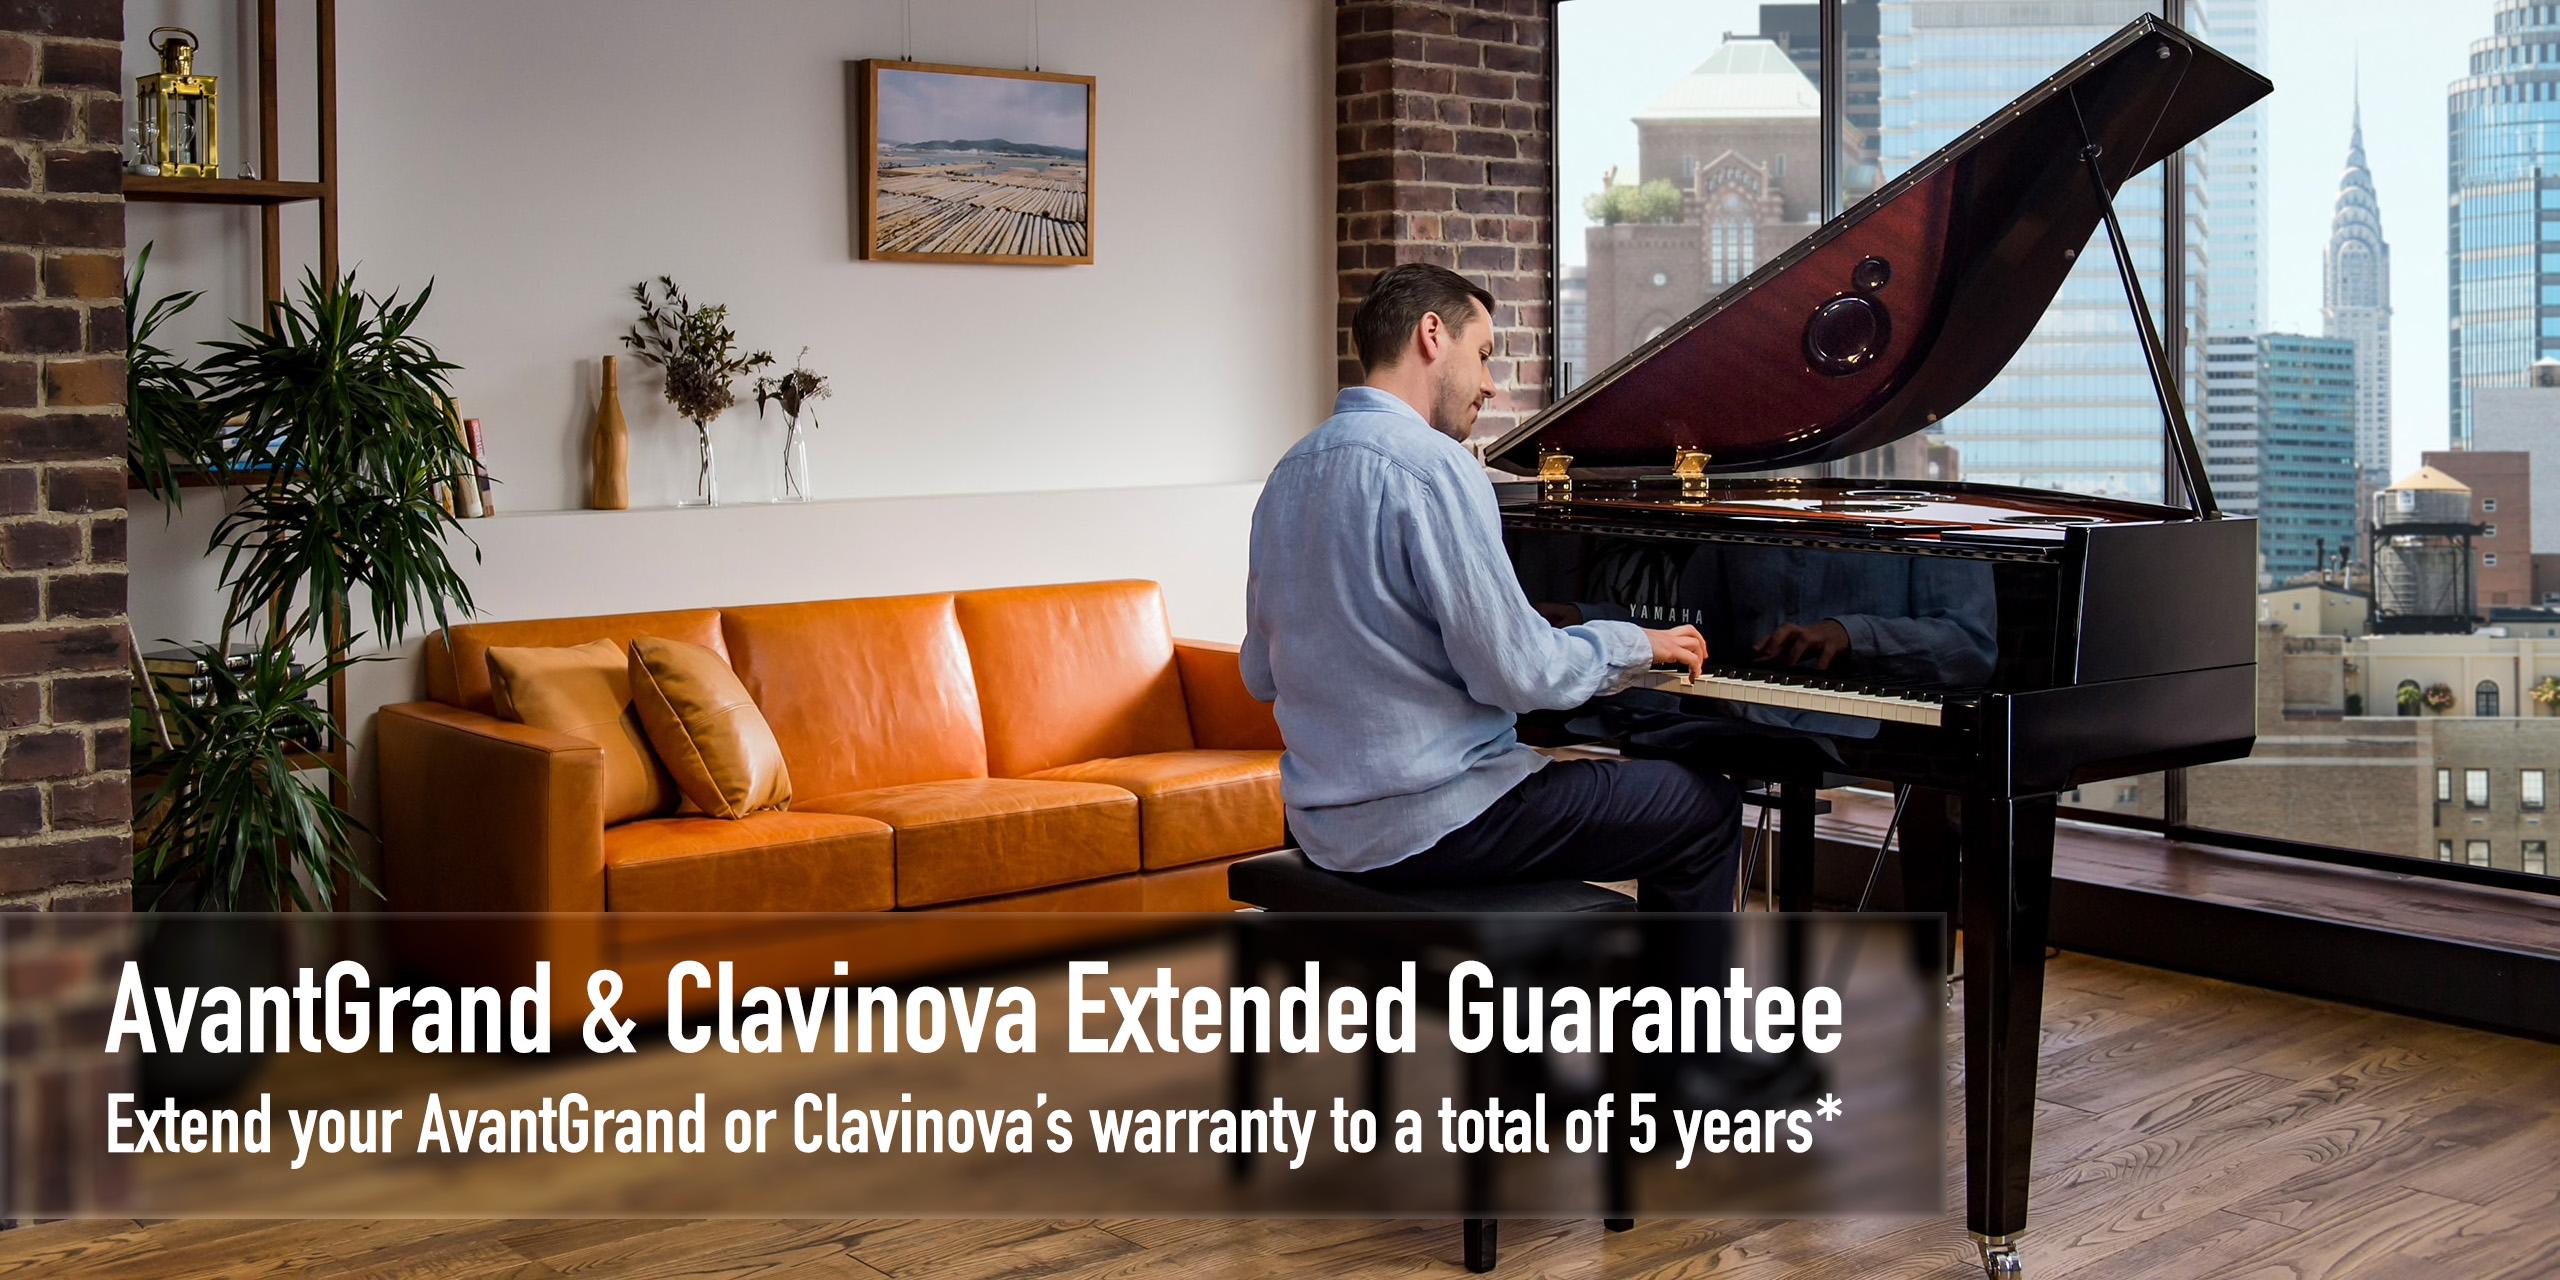 5 Year Guarantee with AvantGrand and CLP Pianos - Registration Required, Read for details